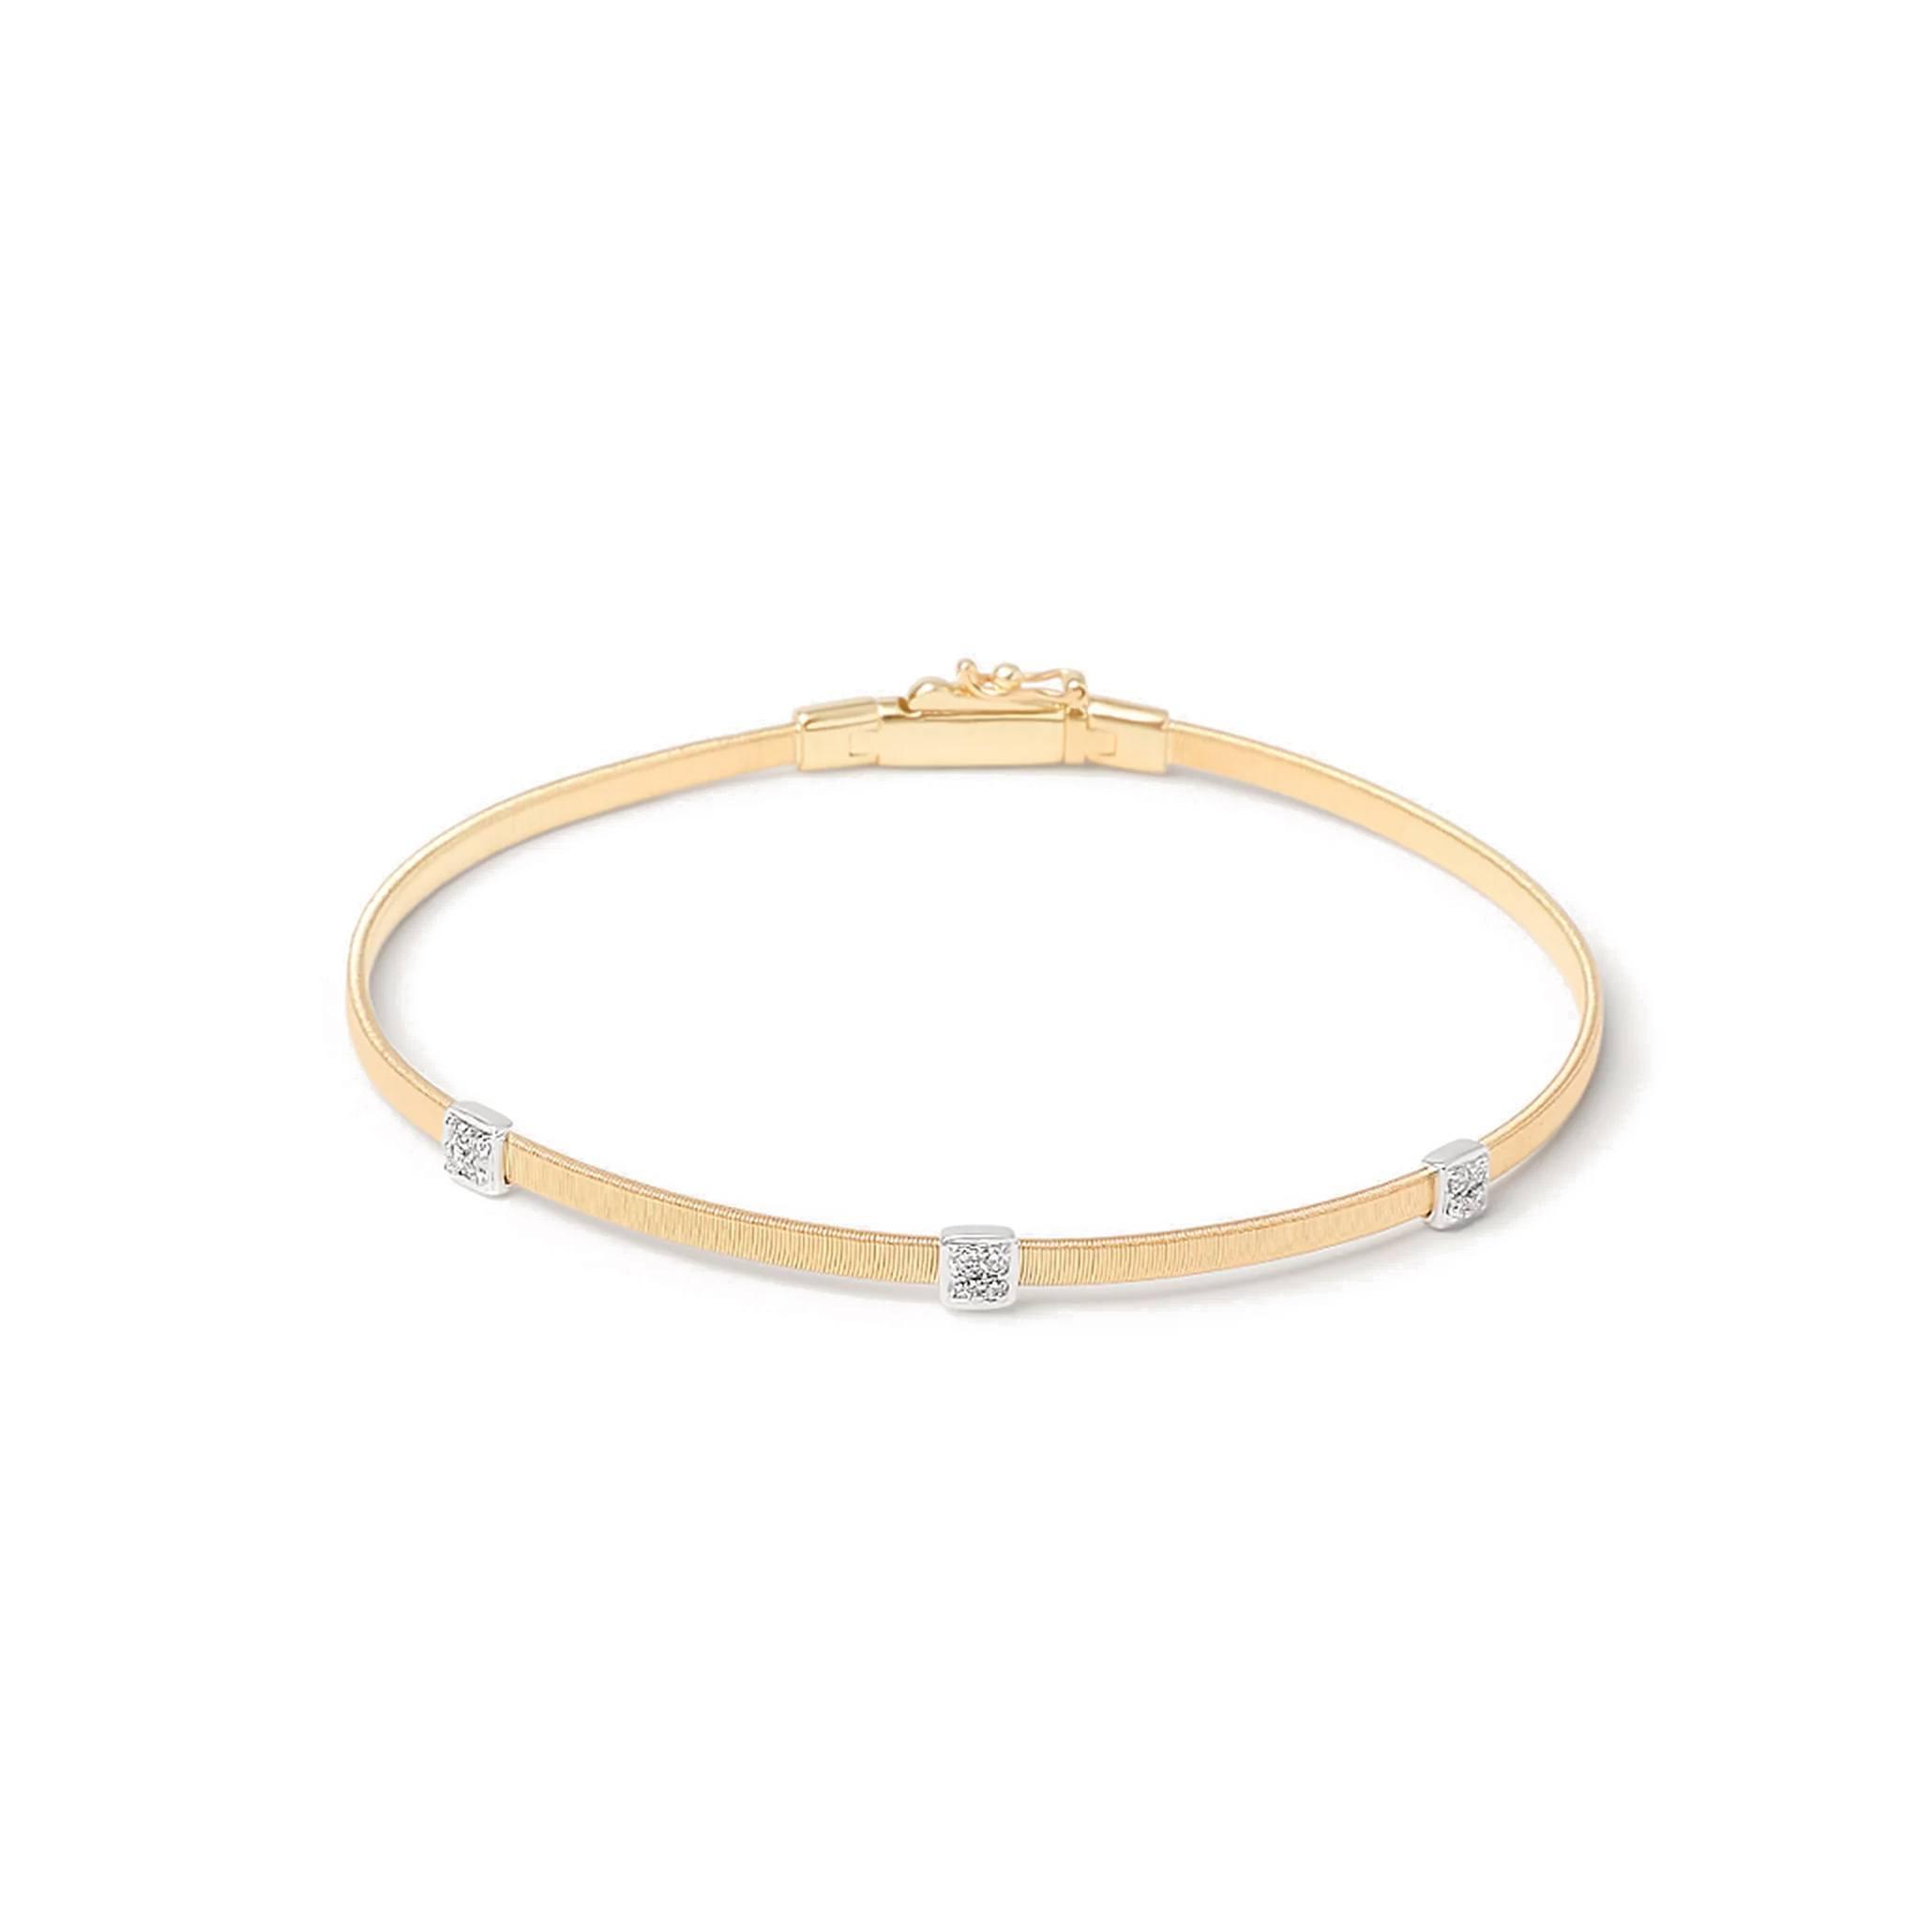 Marco Bicego Masai Collection 18K Yellow Gold and Diamond Small Three Station Bracelet 0